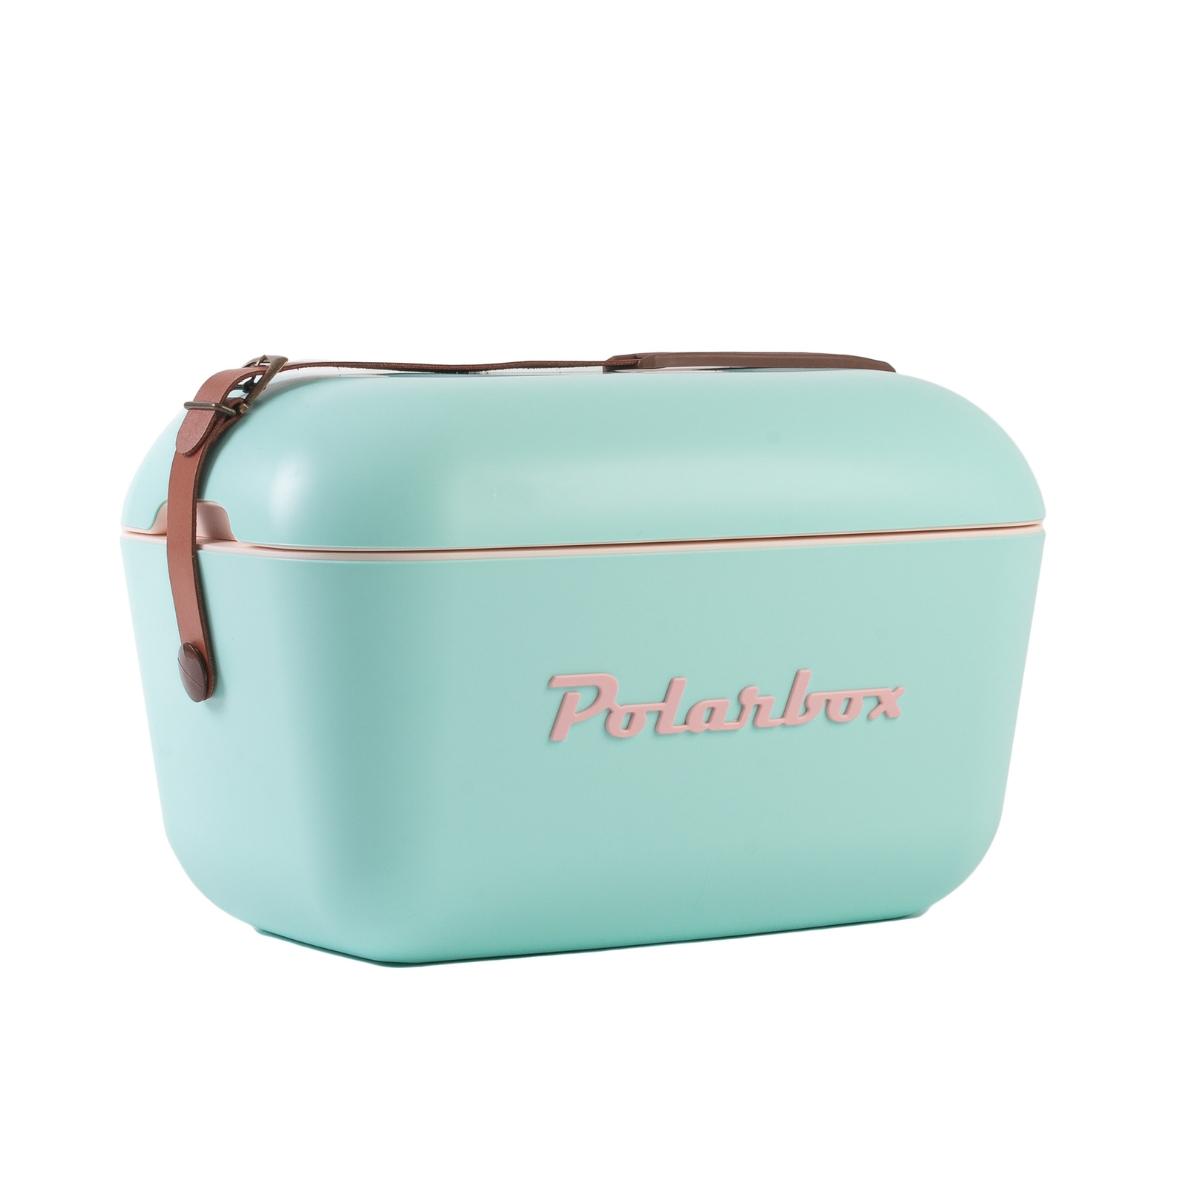 Polarbox 12 Liters Classic Cooler Box Cyan - Baby Rose Baby Rose Cyan PP PS